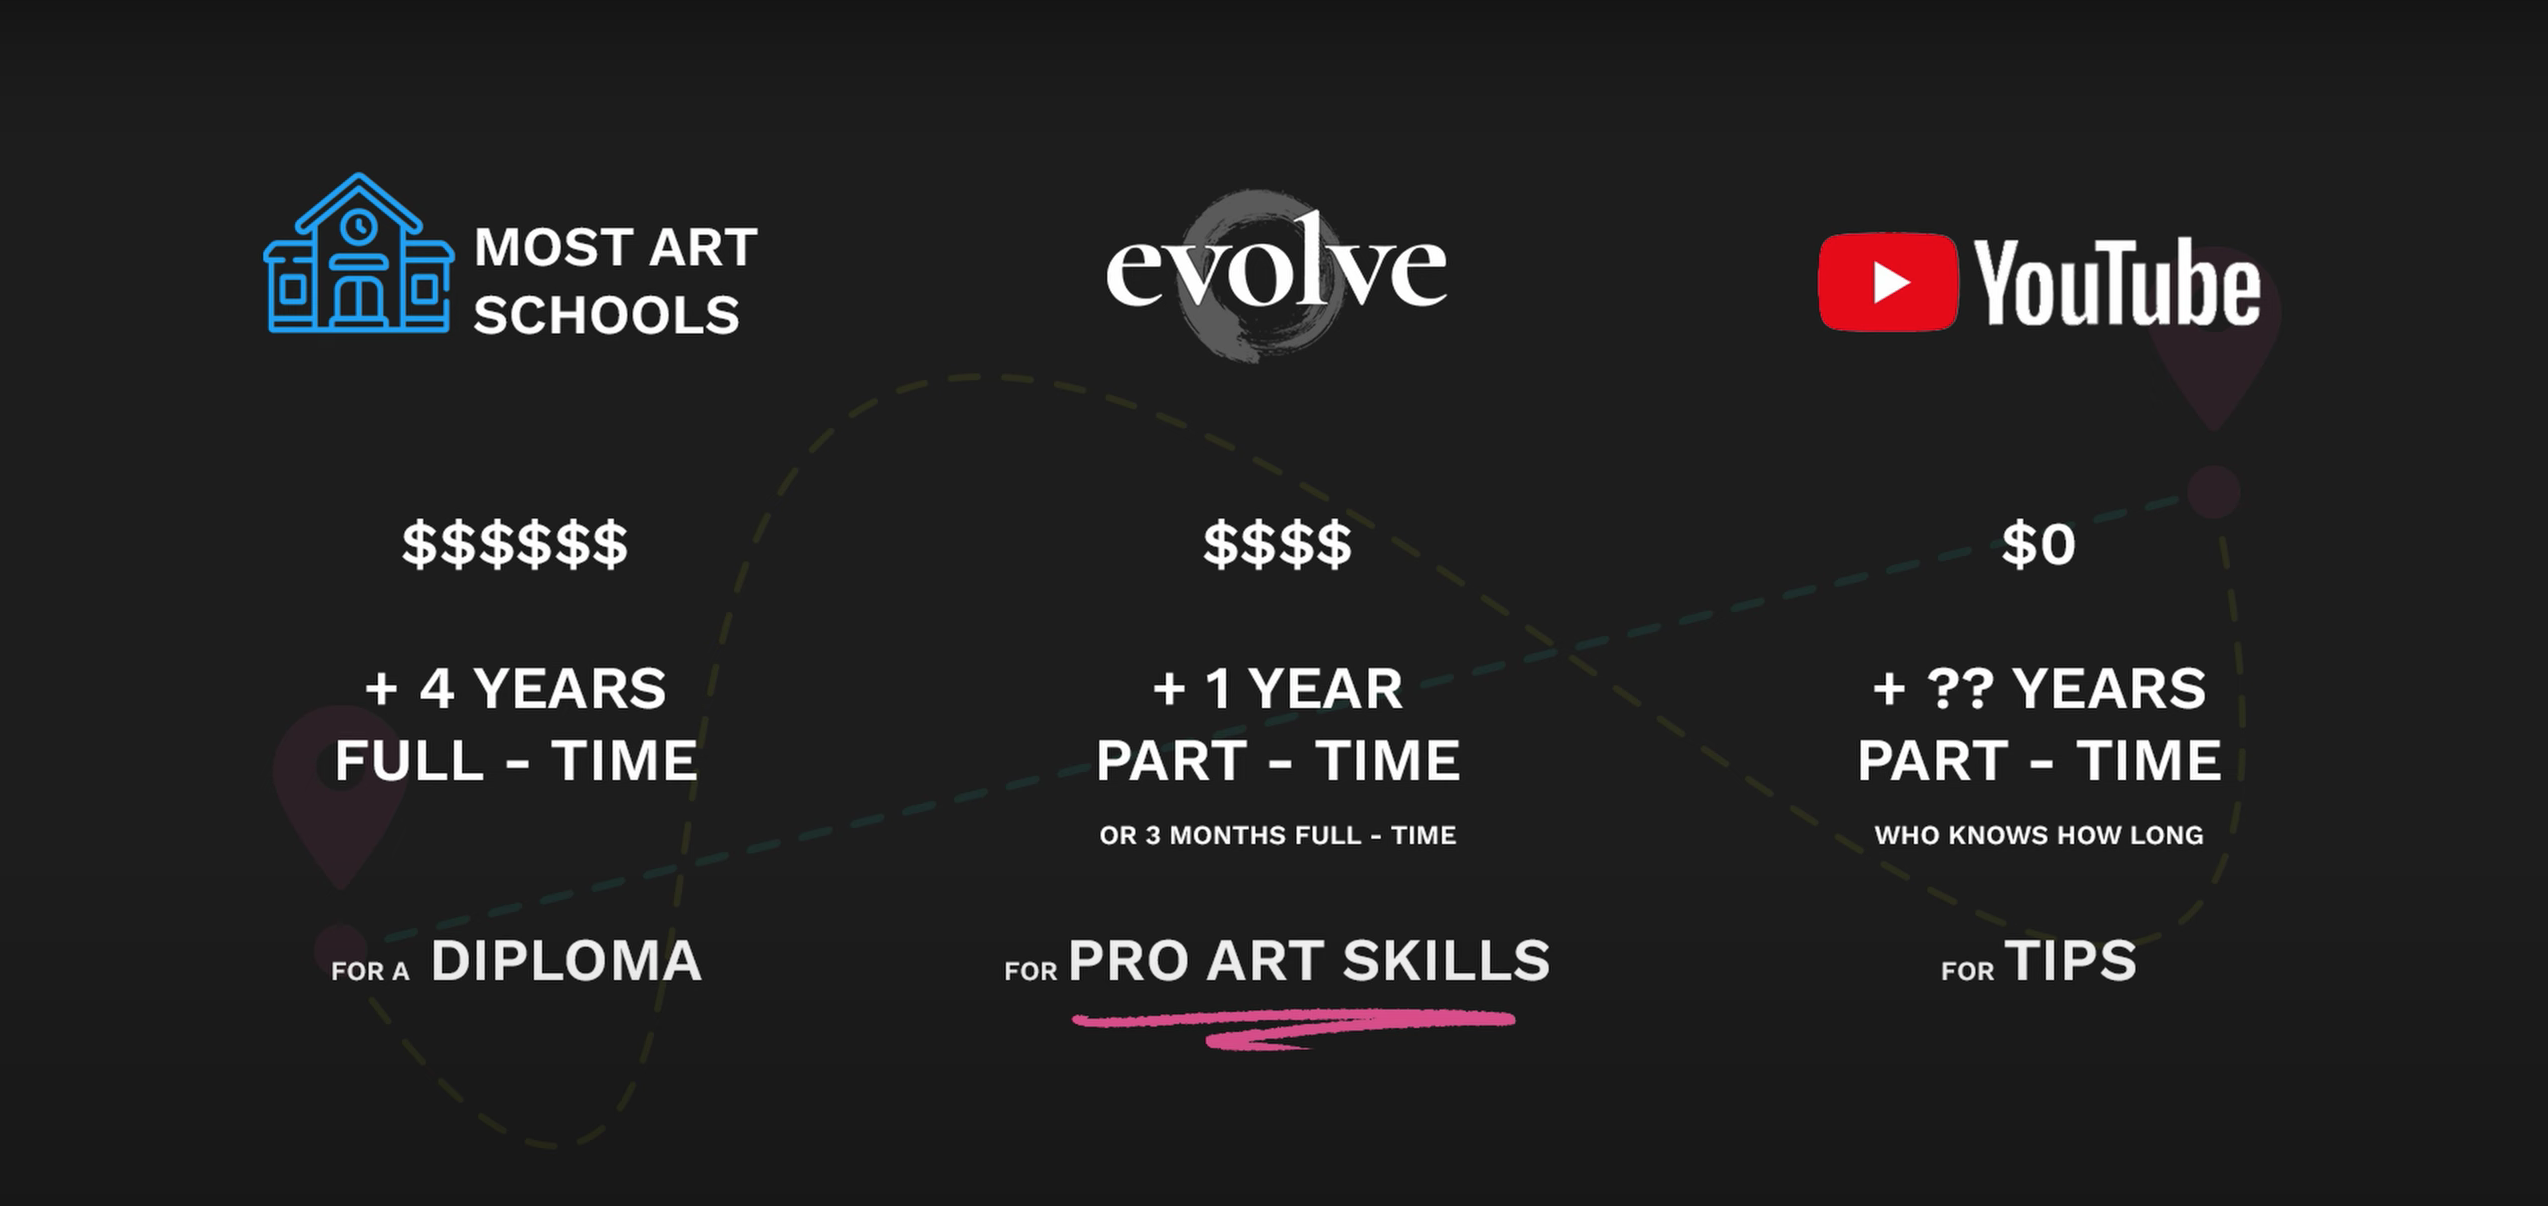 When compared with what you get for your time and money at most art schools and YouTube, it’s easy to see how Evolve provides the best value for money for guaranteed results. 